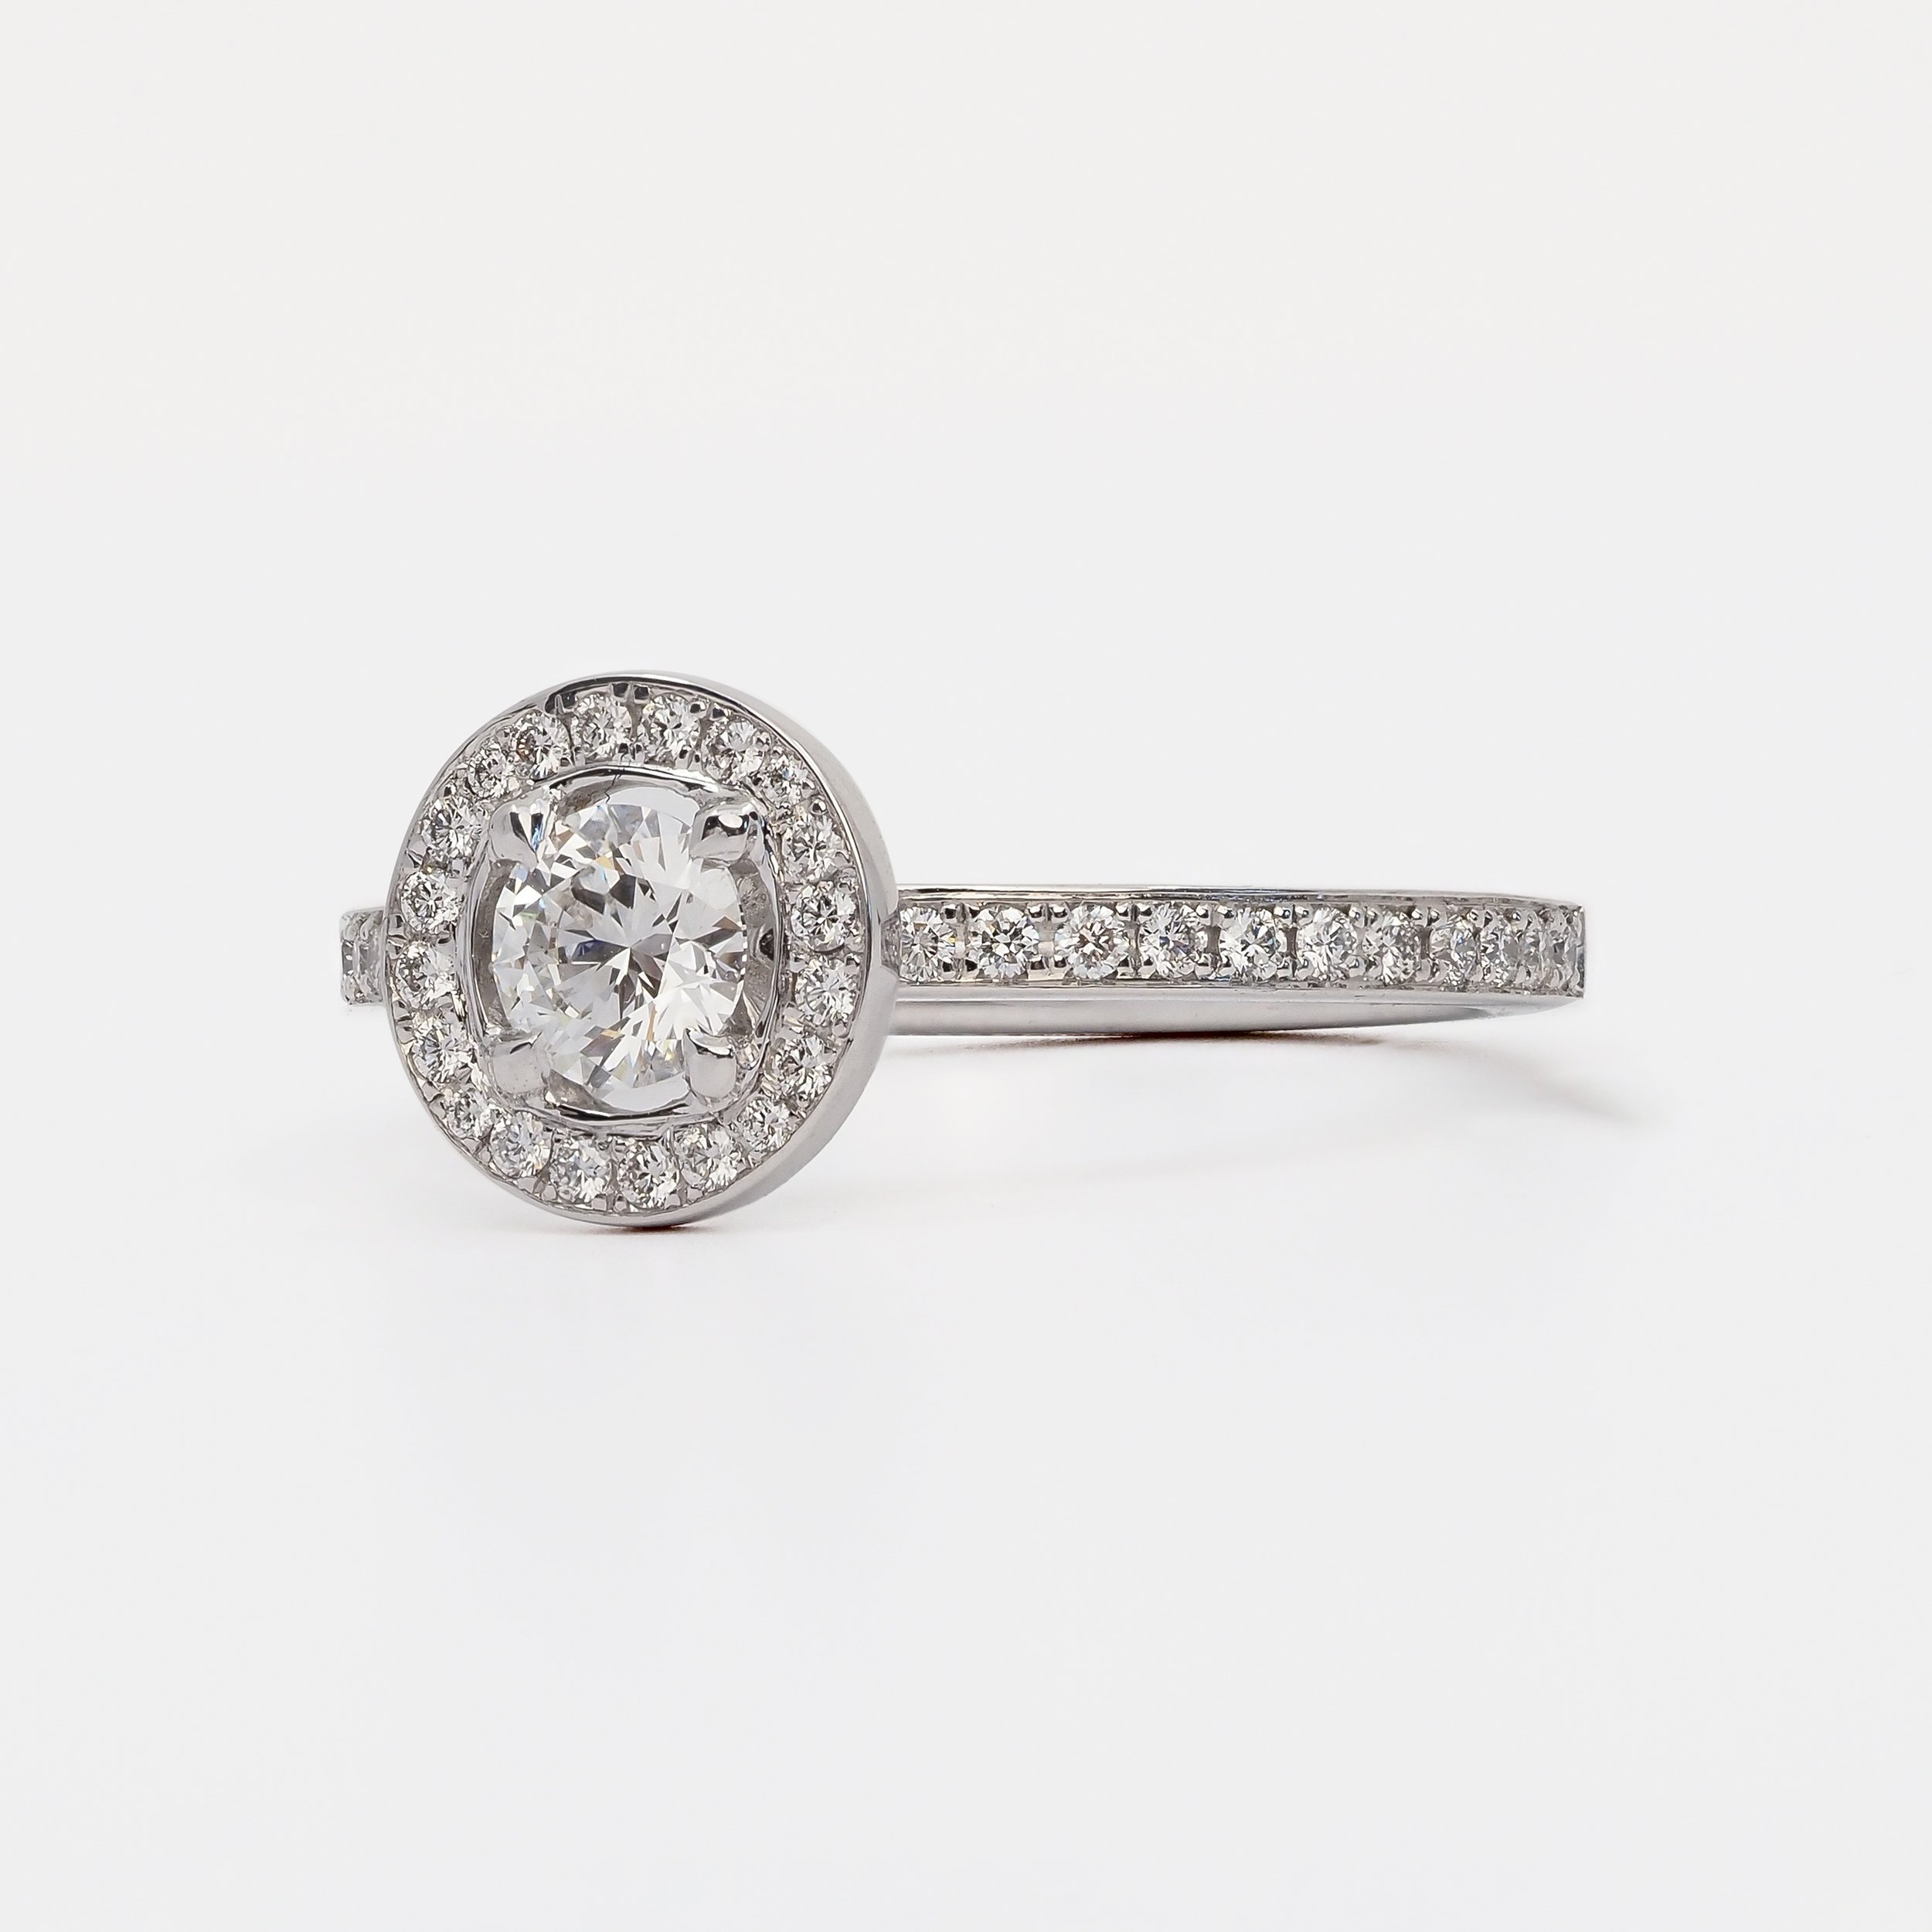 Solitaire ring "Madeleine"